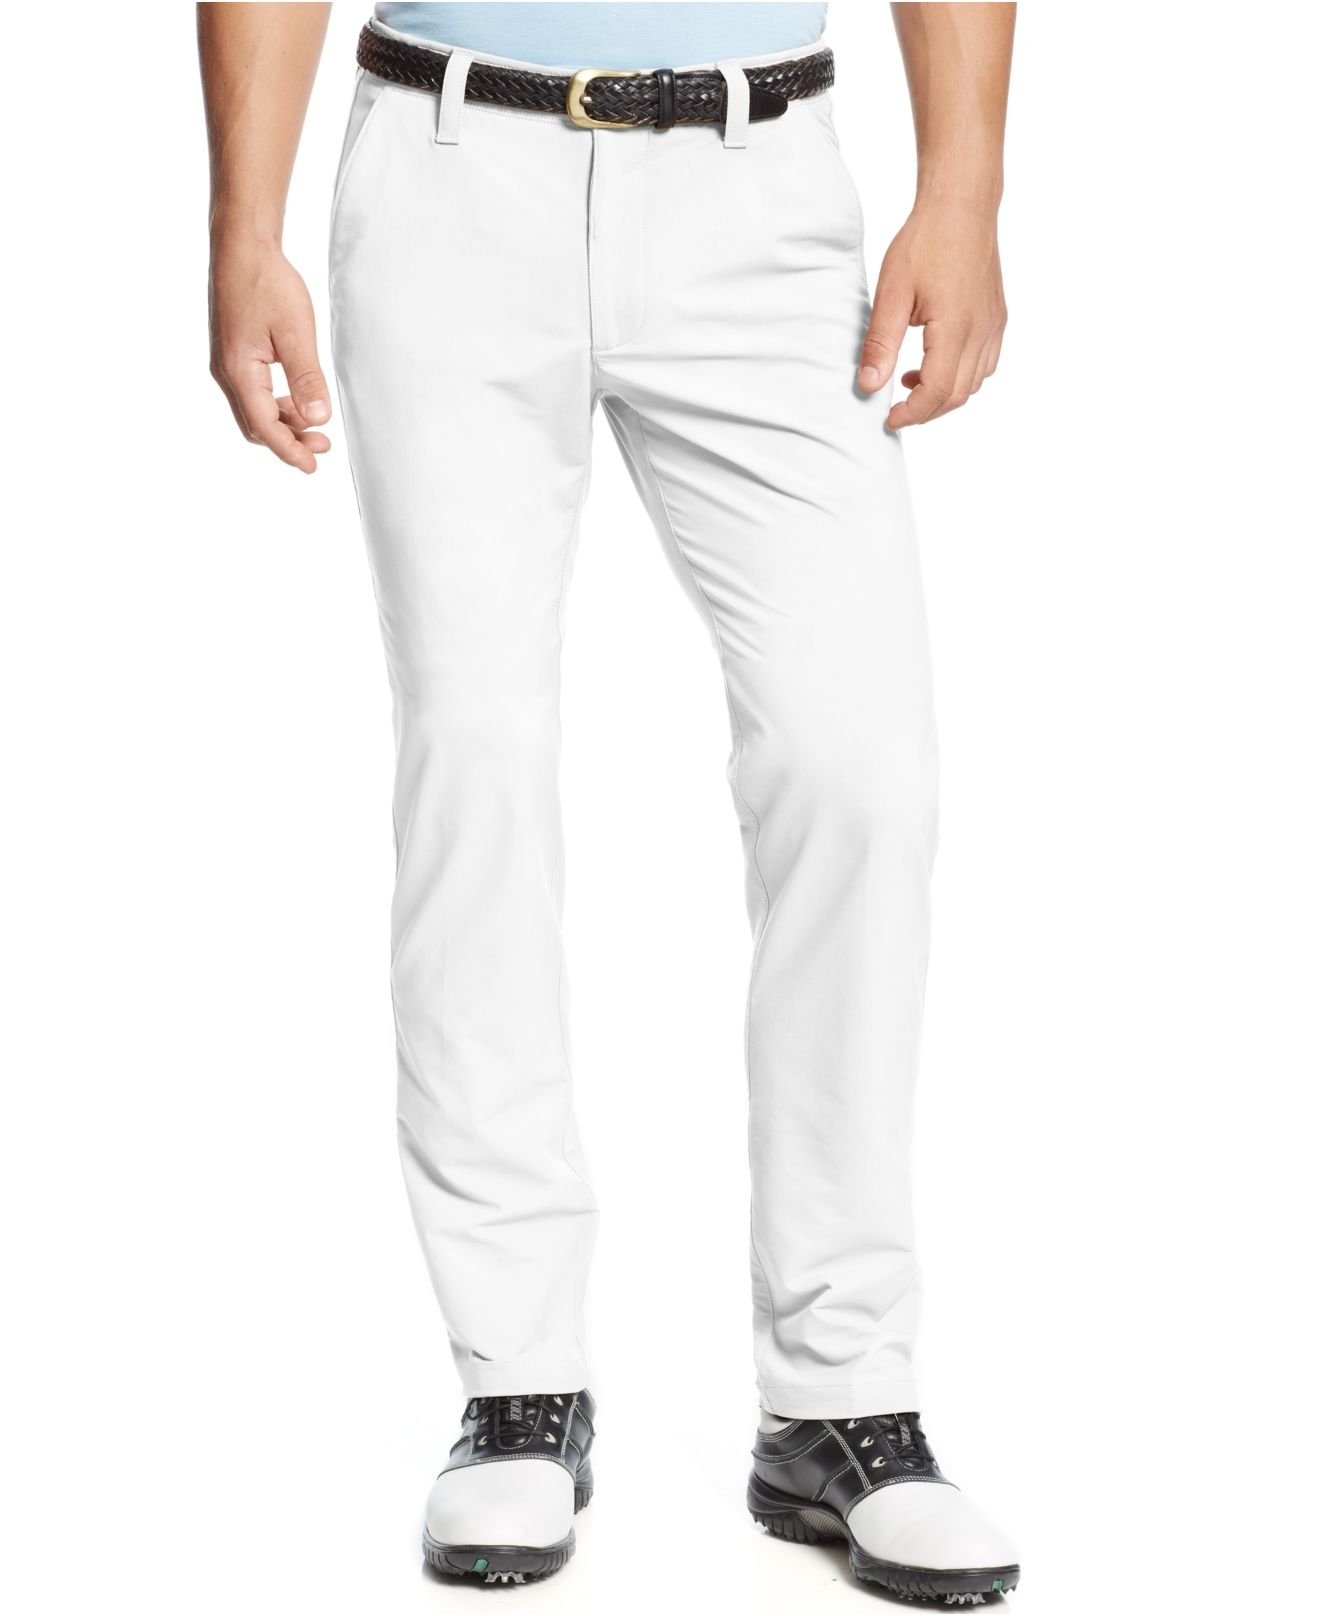 Under Armour Matchplay Flat Front Performance Golf Pants in White for ...